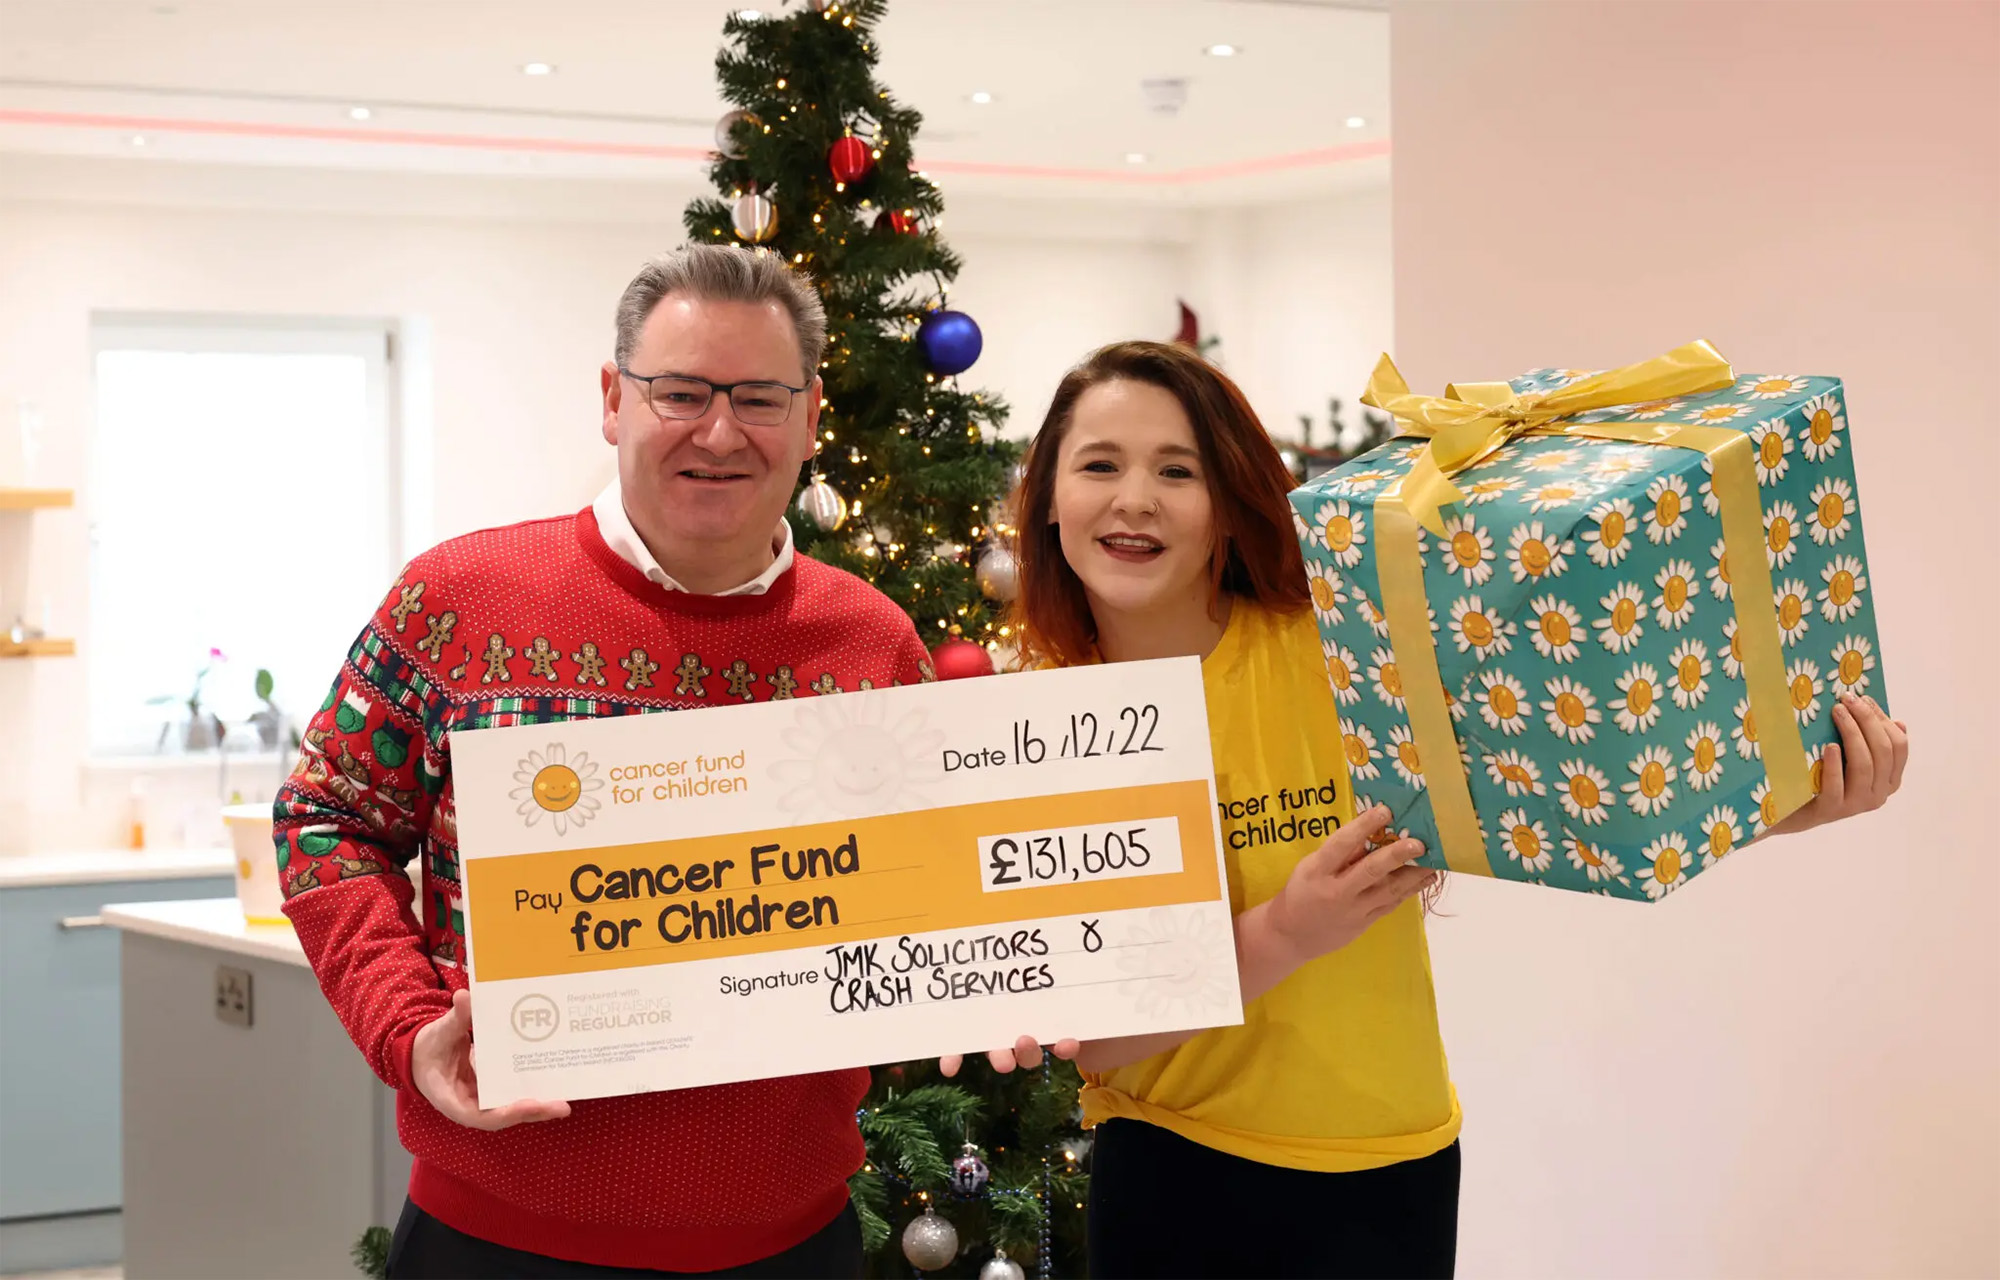 JMK Solicitors hands over £41k cheque to Cancer Fund for Children